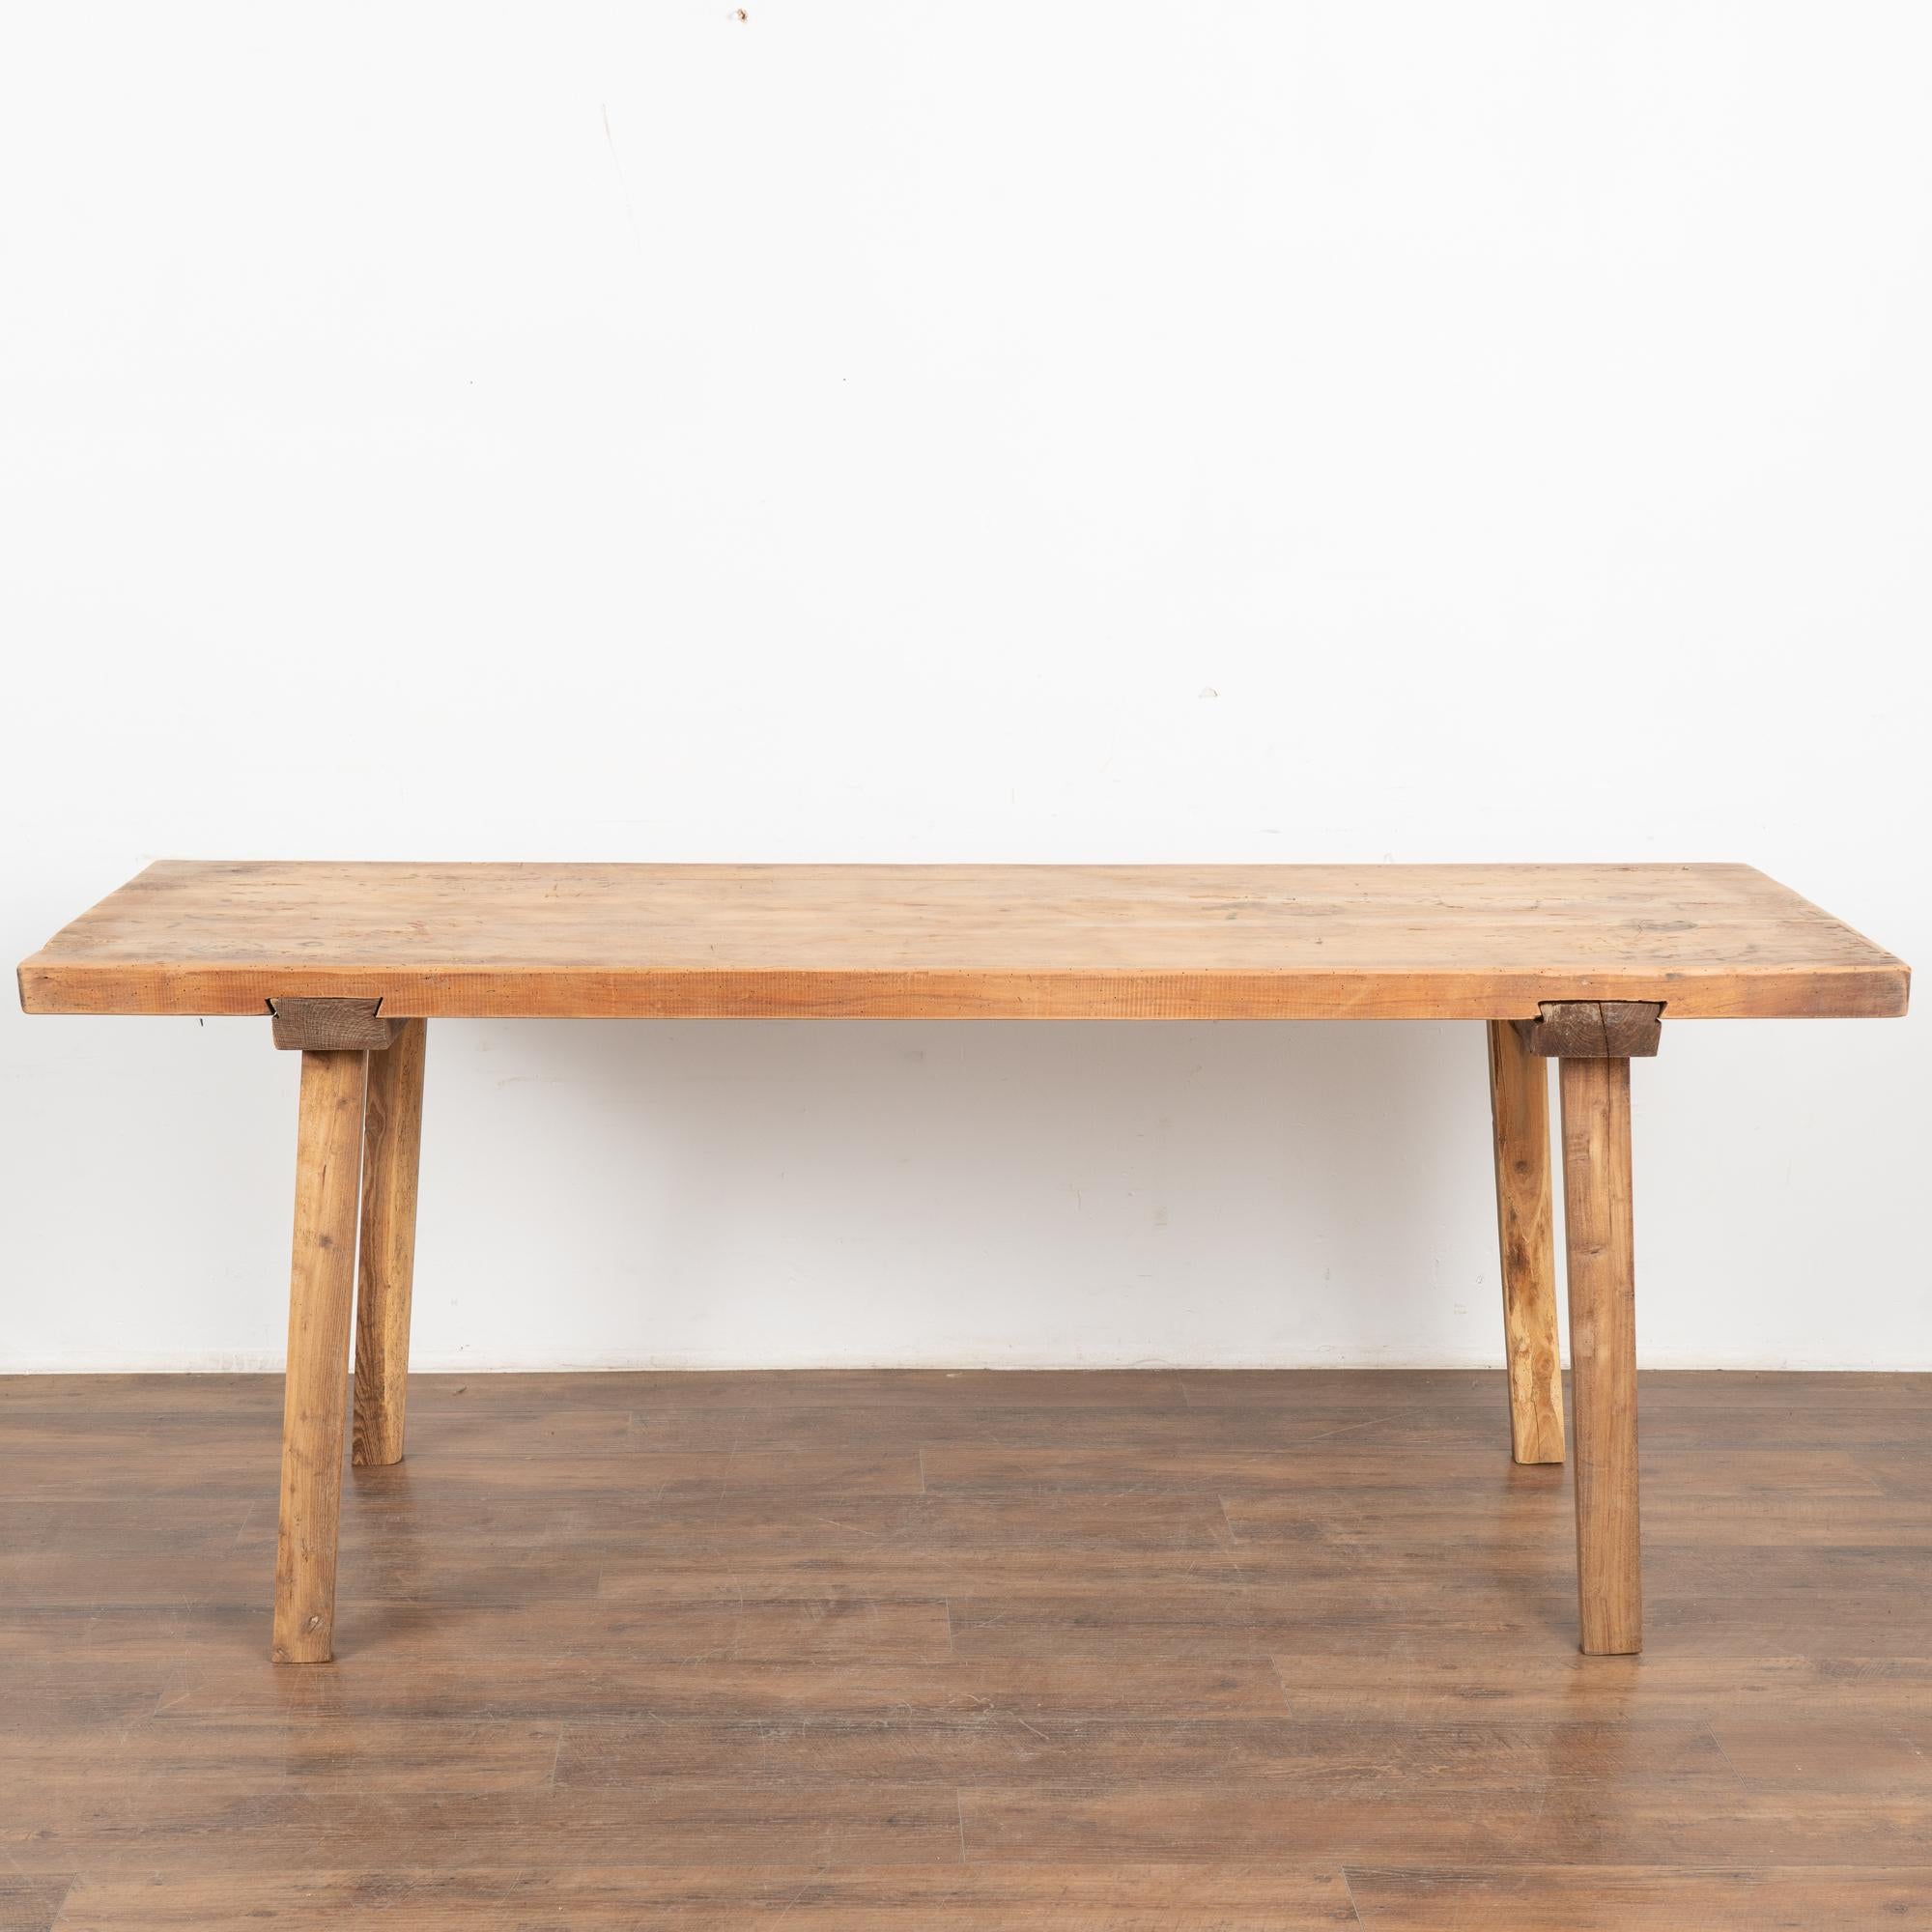 Rustic Plank Top Console Table With Peg Legs, Hungary circa 1900 For Sale 1